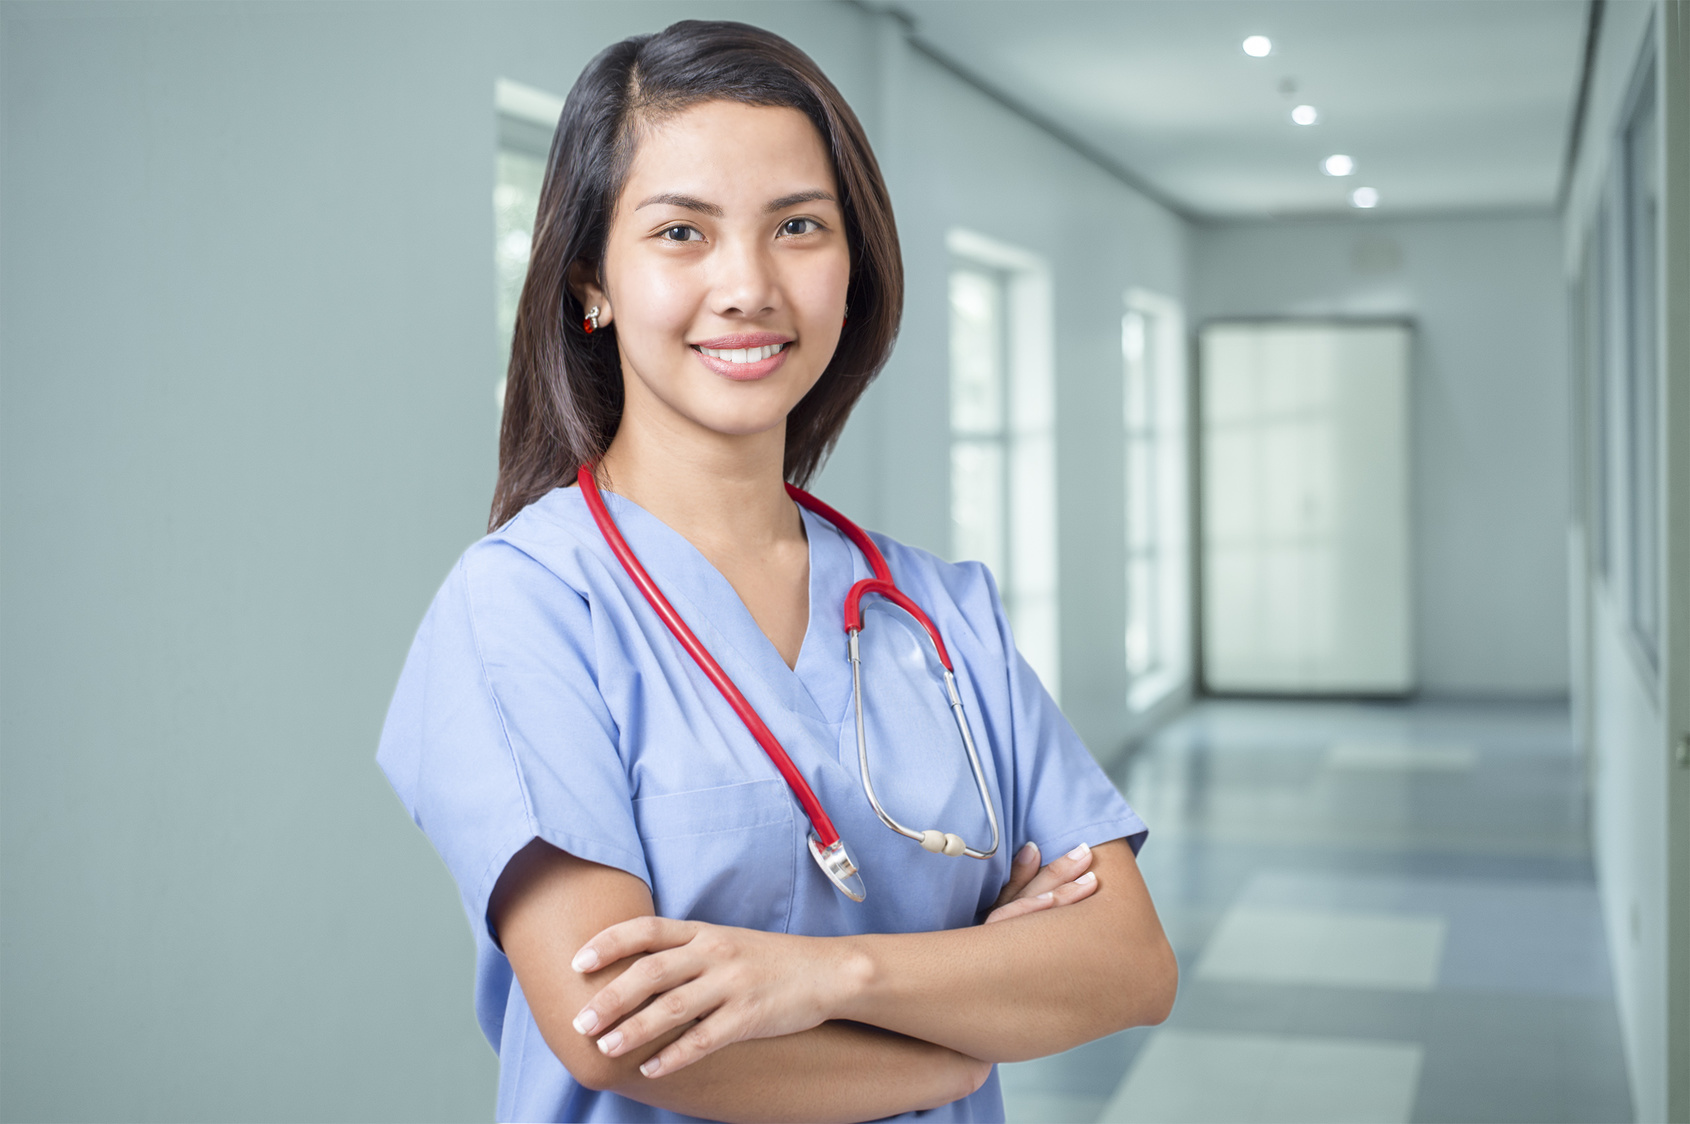 Want to Work in Healthcare? Medical Assistants Are Always Needed